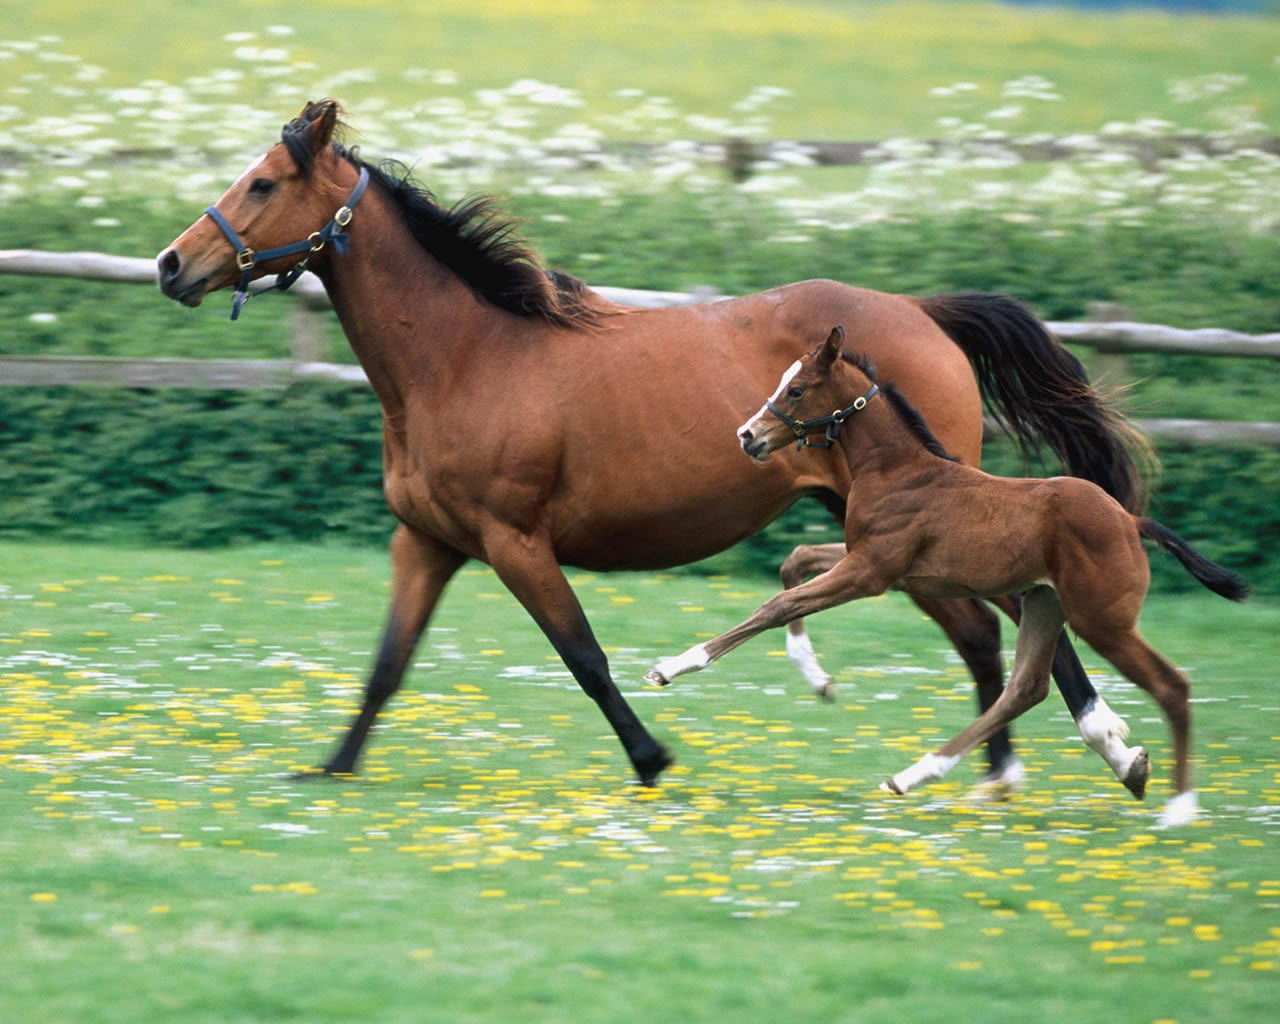 horse-mom-and-baby_1280x1024_2956.jpg?width=500